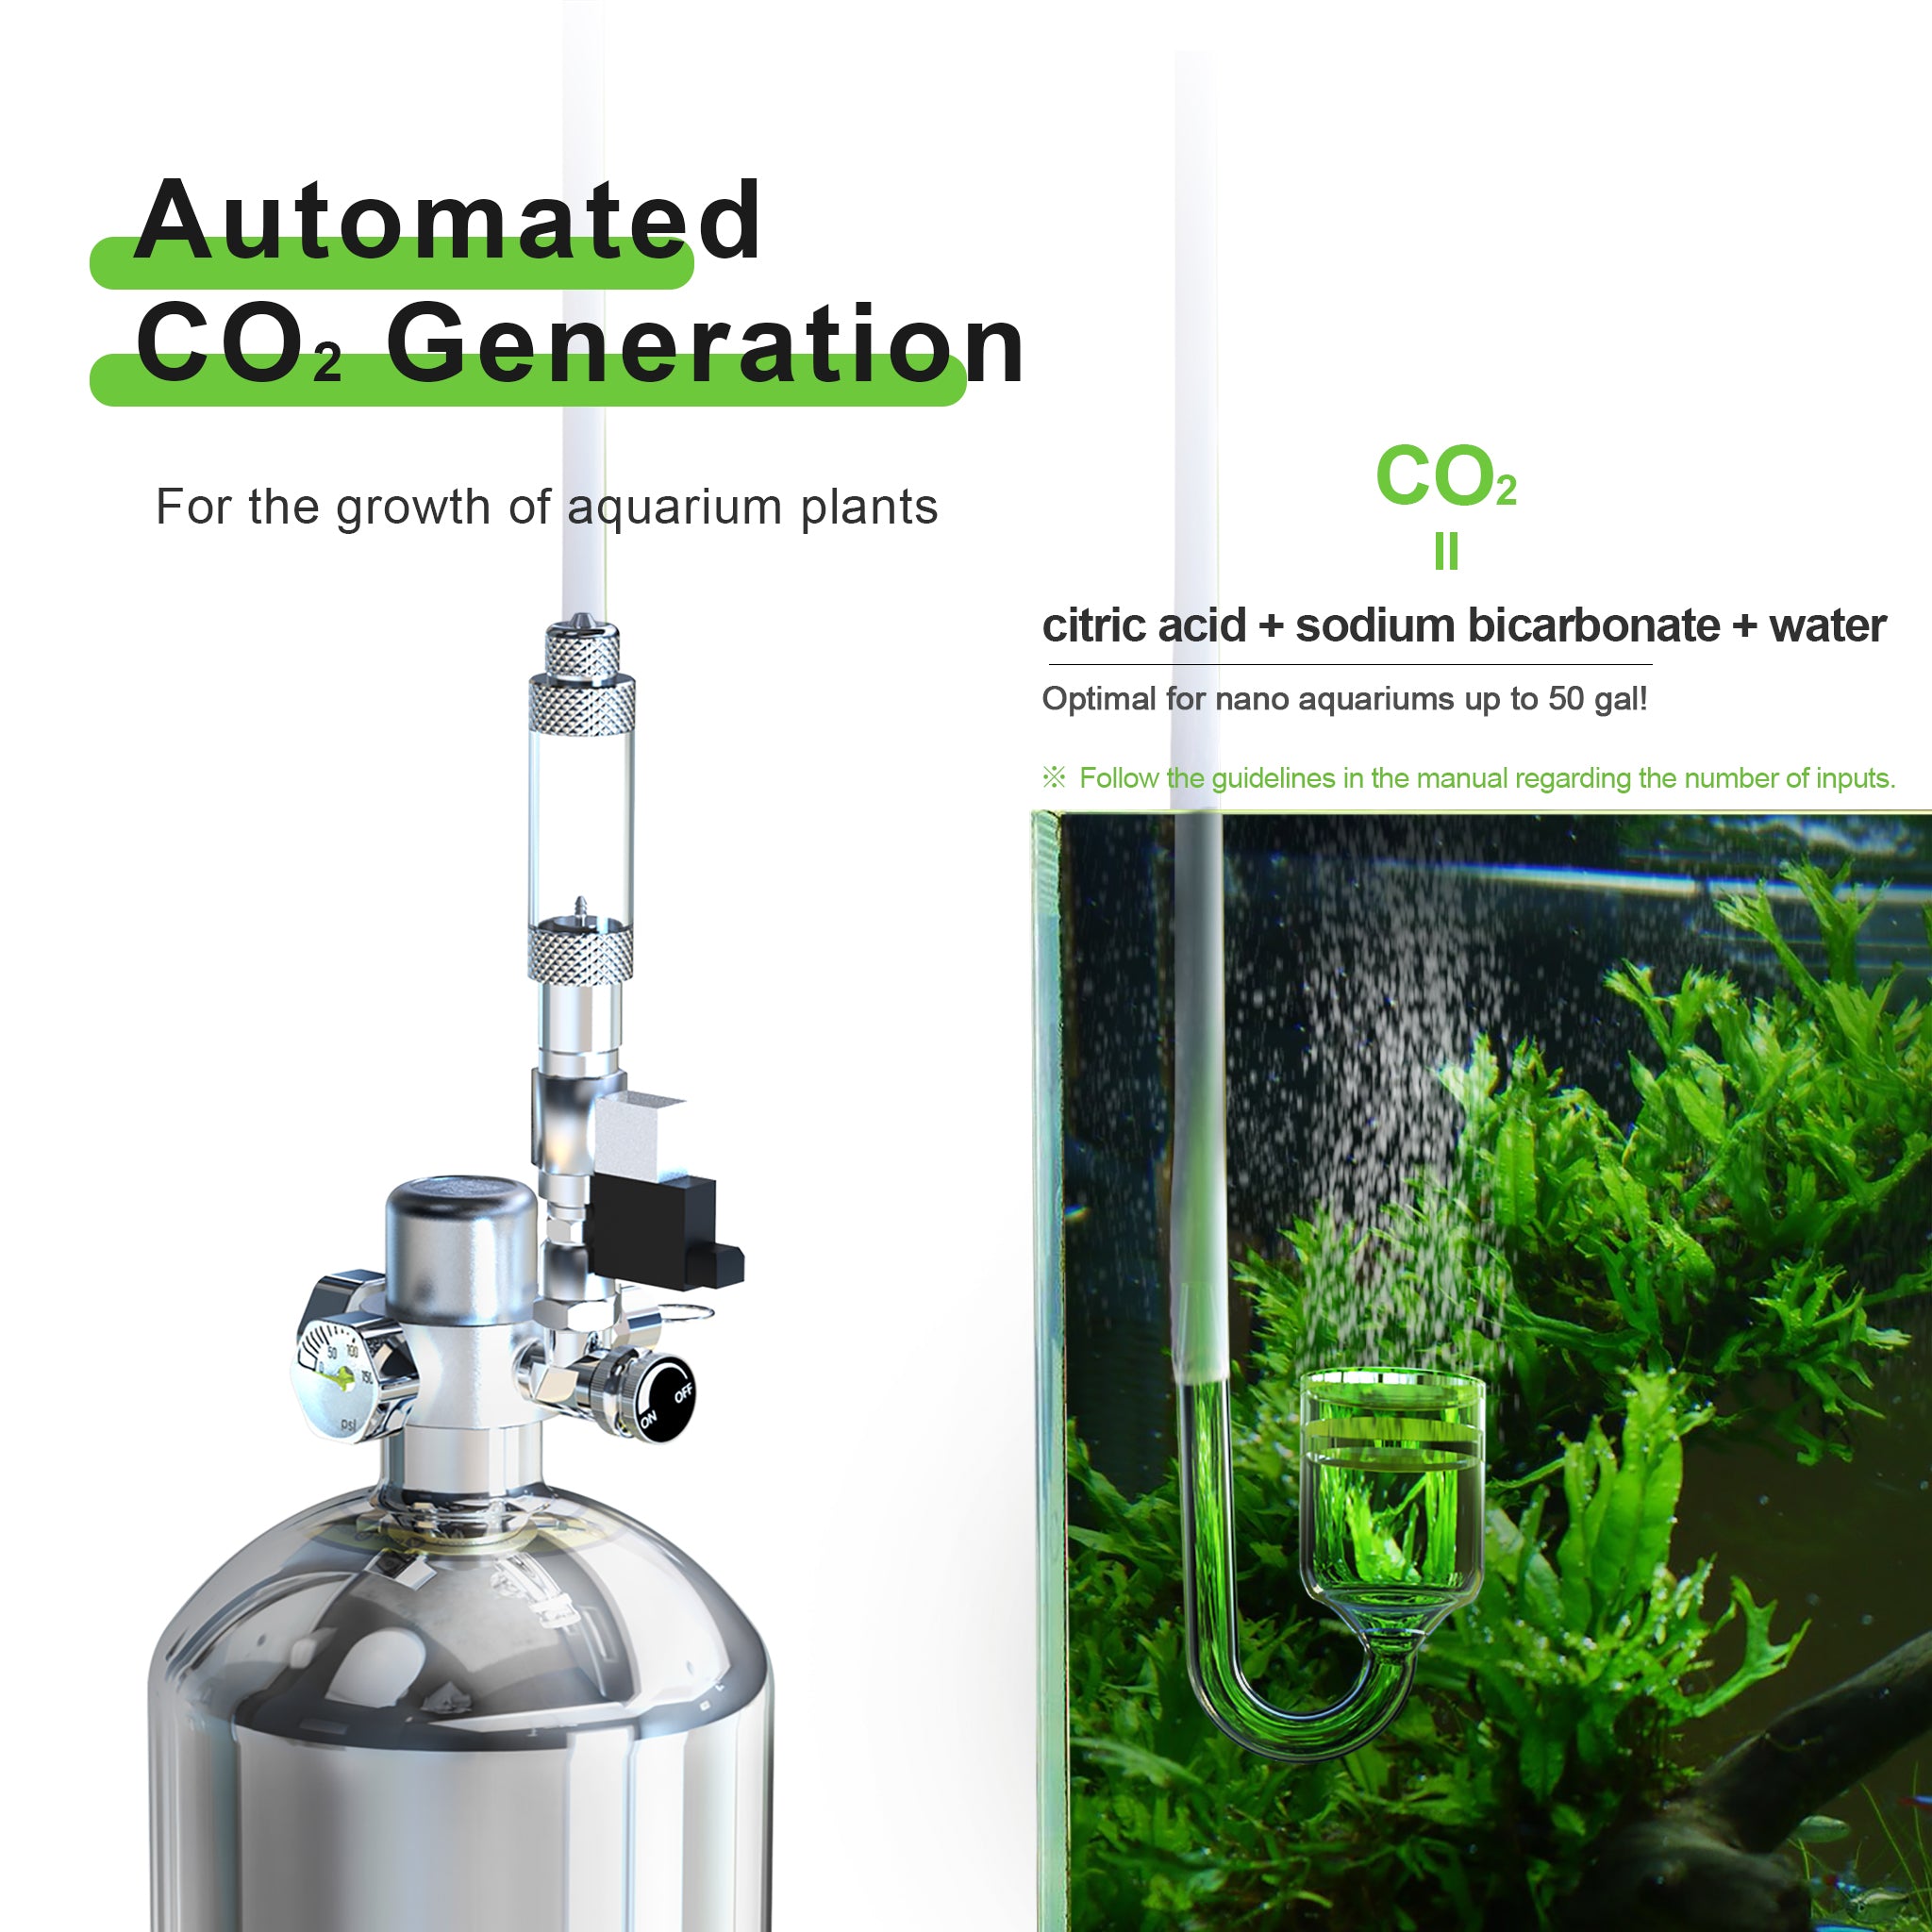 Stainless Steel Aquarium Co2 Diffuser L Size at Low Price Buy